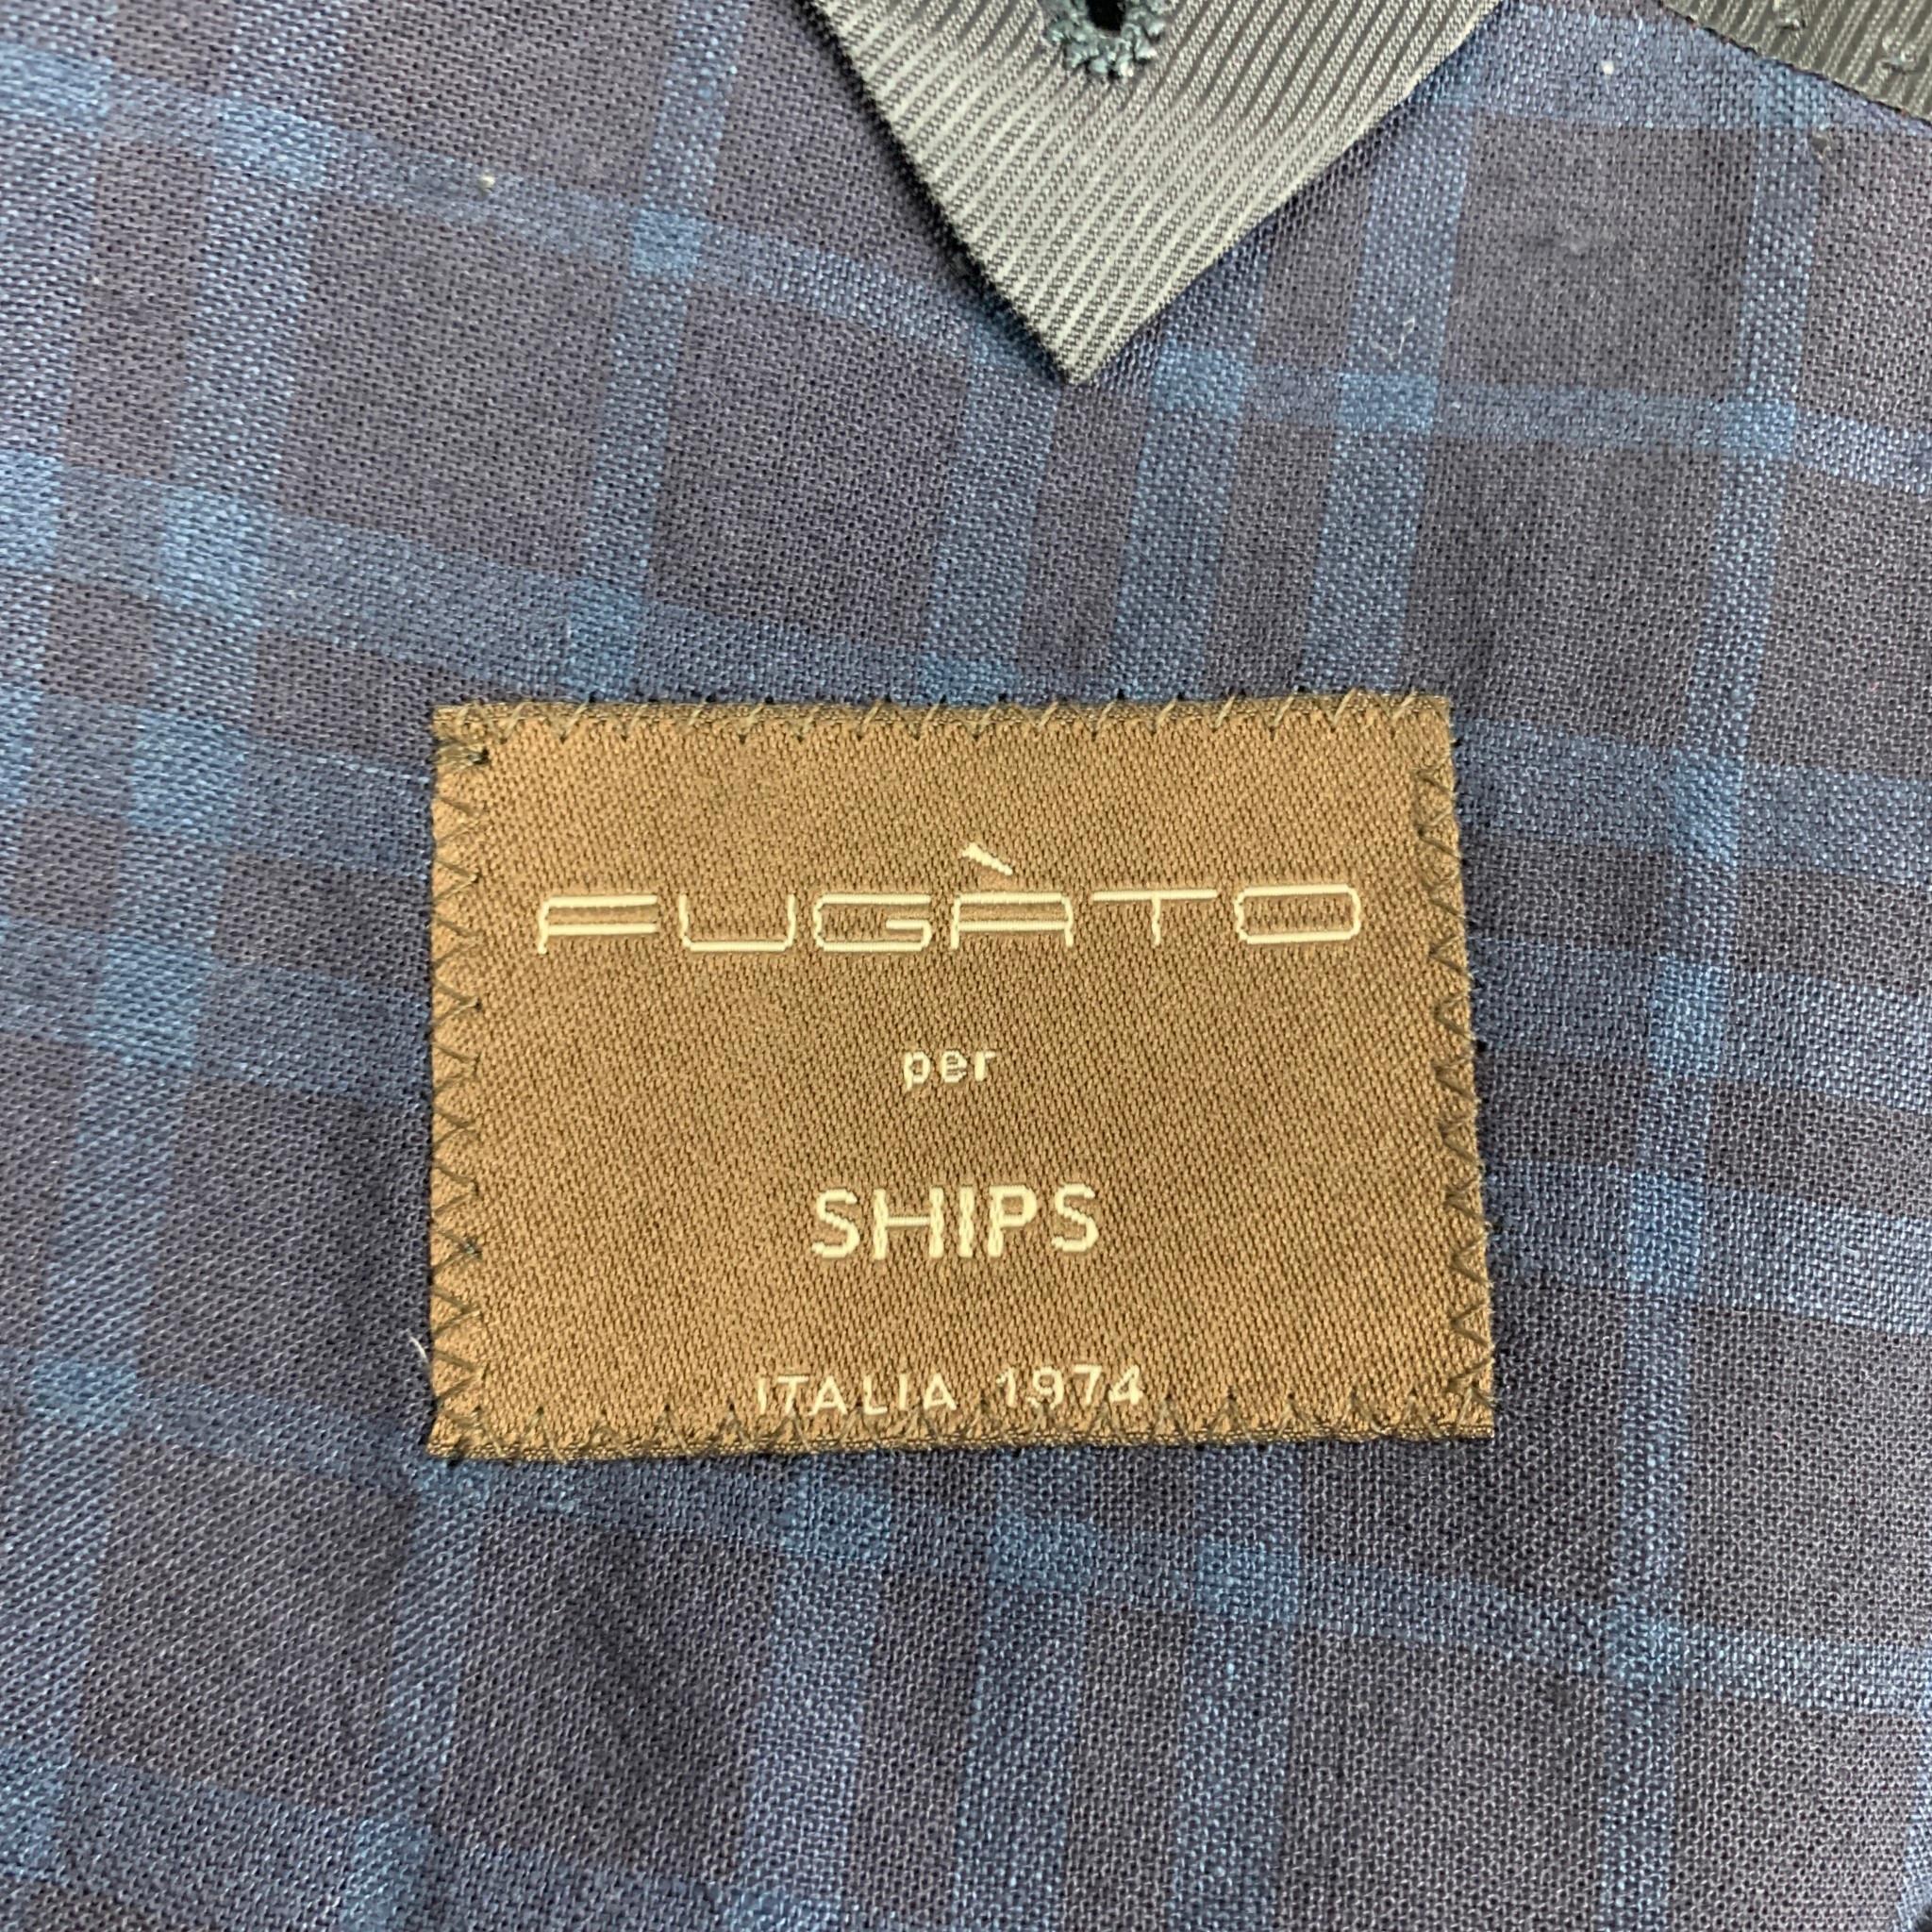 FUGATO for SHIPS Size 36 Navy Blue Plaid Flax Wool Sport Coat 2